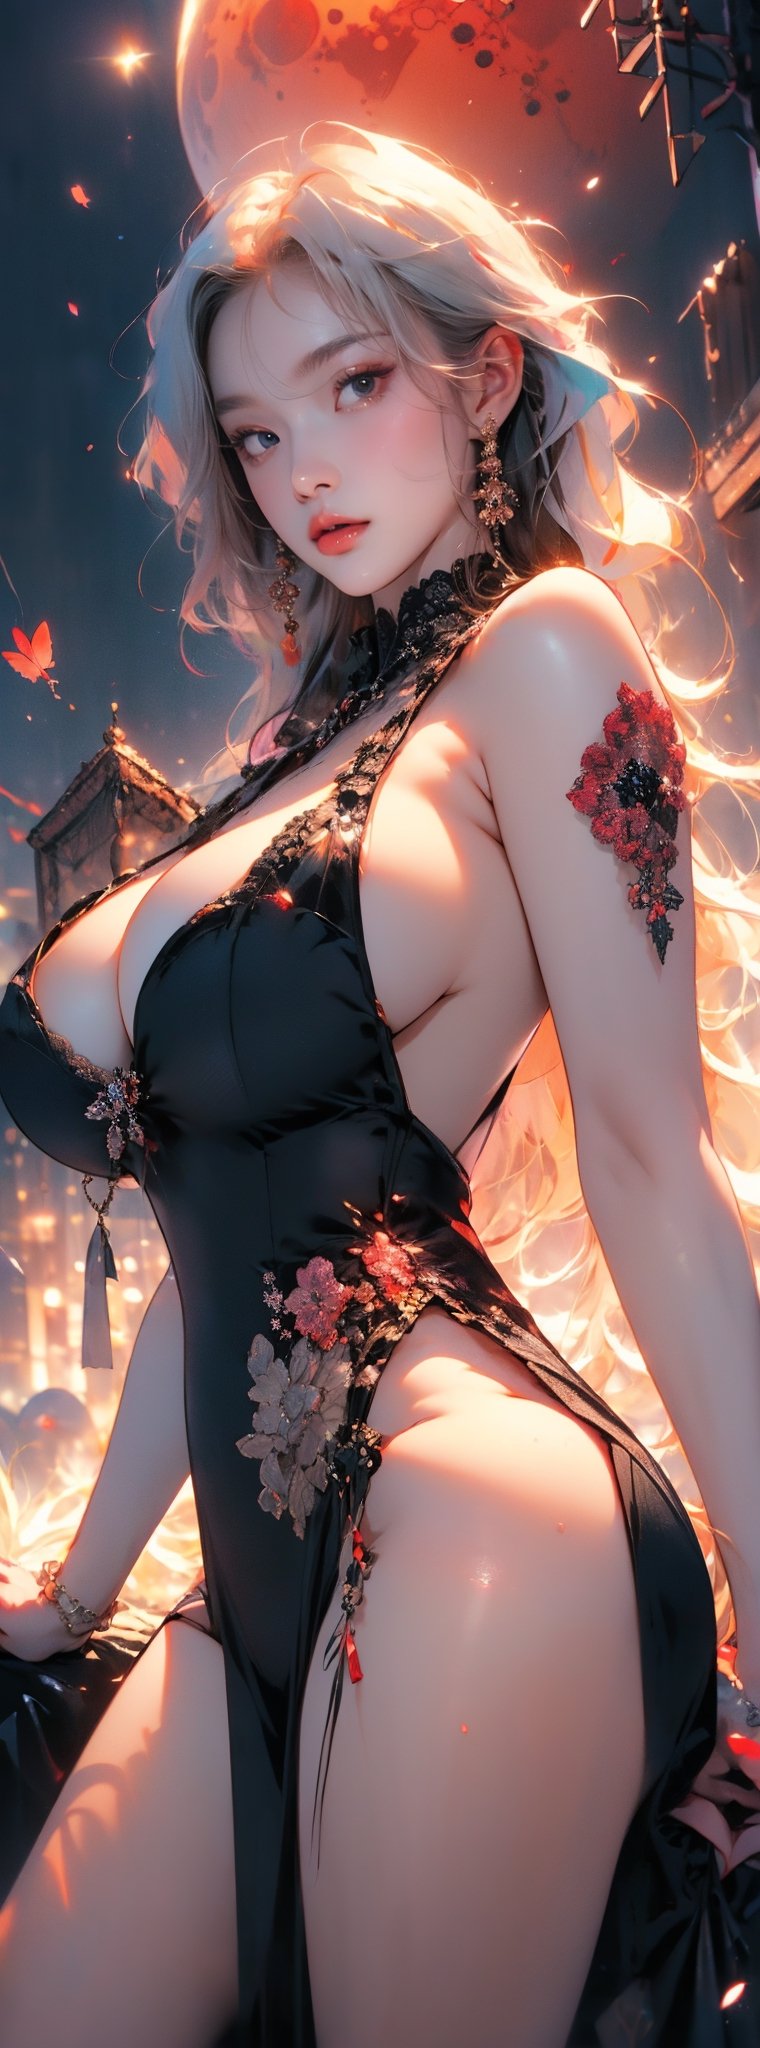 A Korean beauty with smoky makeup exposed her natural big breasts, like a surreal masterpiece of a female vampire. She was wearing a black and red dress, platinum blond hair, fair skin, and there was a huge blood moon behind her at night, like a cityscape in the twilight.